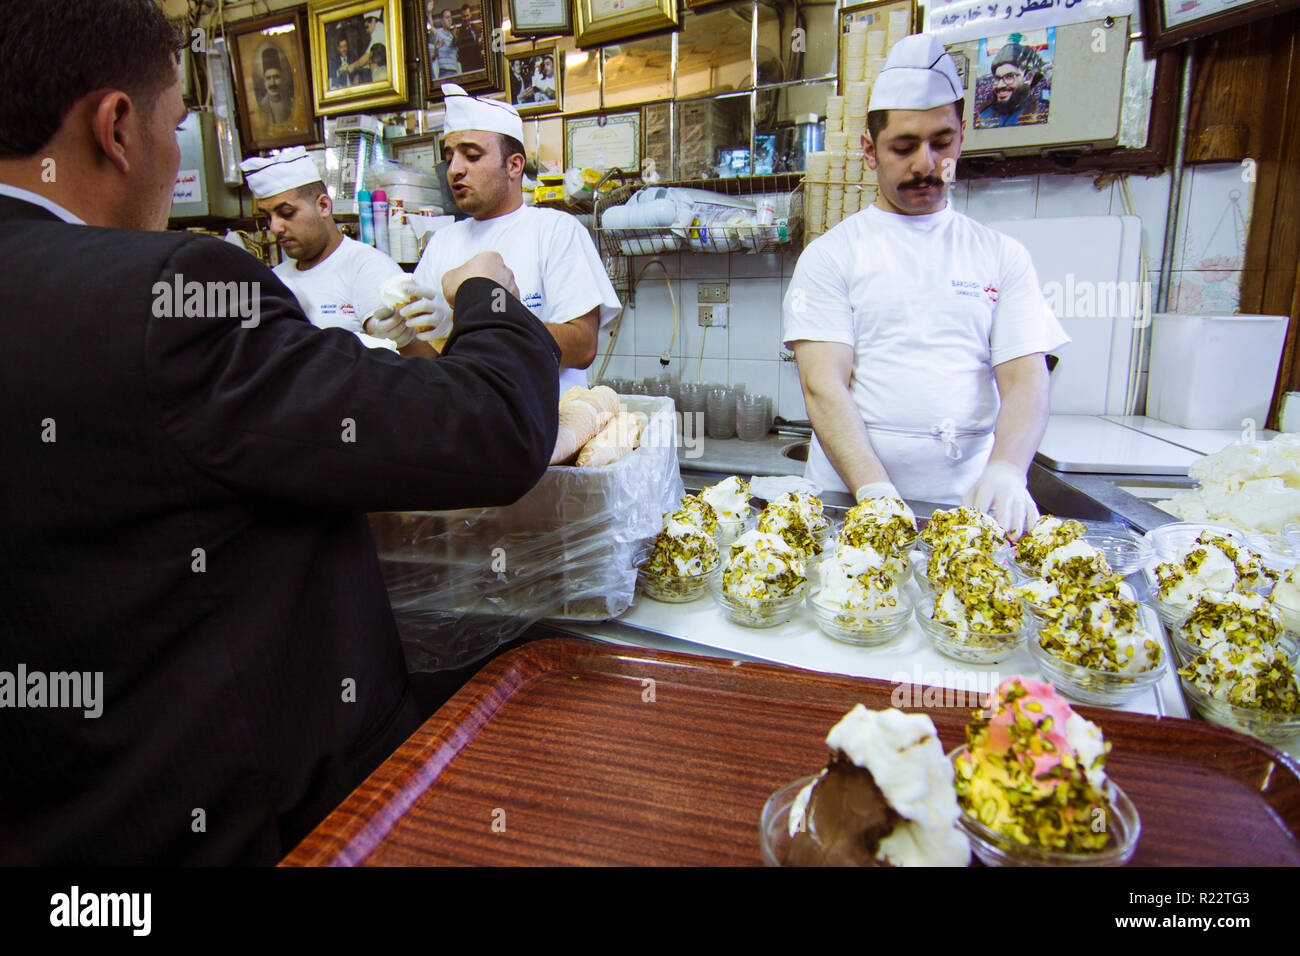 Damascus, Syria : Vendors and clients at Bakdash ice cream parlor. Established in 1885 in Al-Hamidiyah Souq, Bakdash is famous all around the Middle E Stock Photo